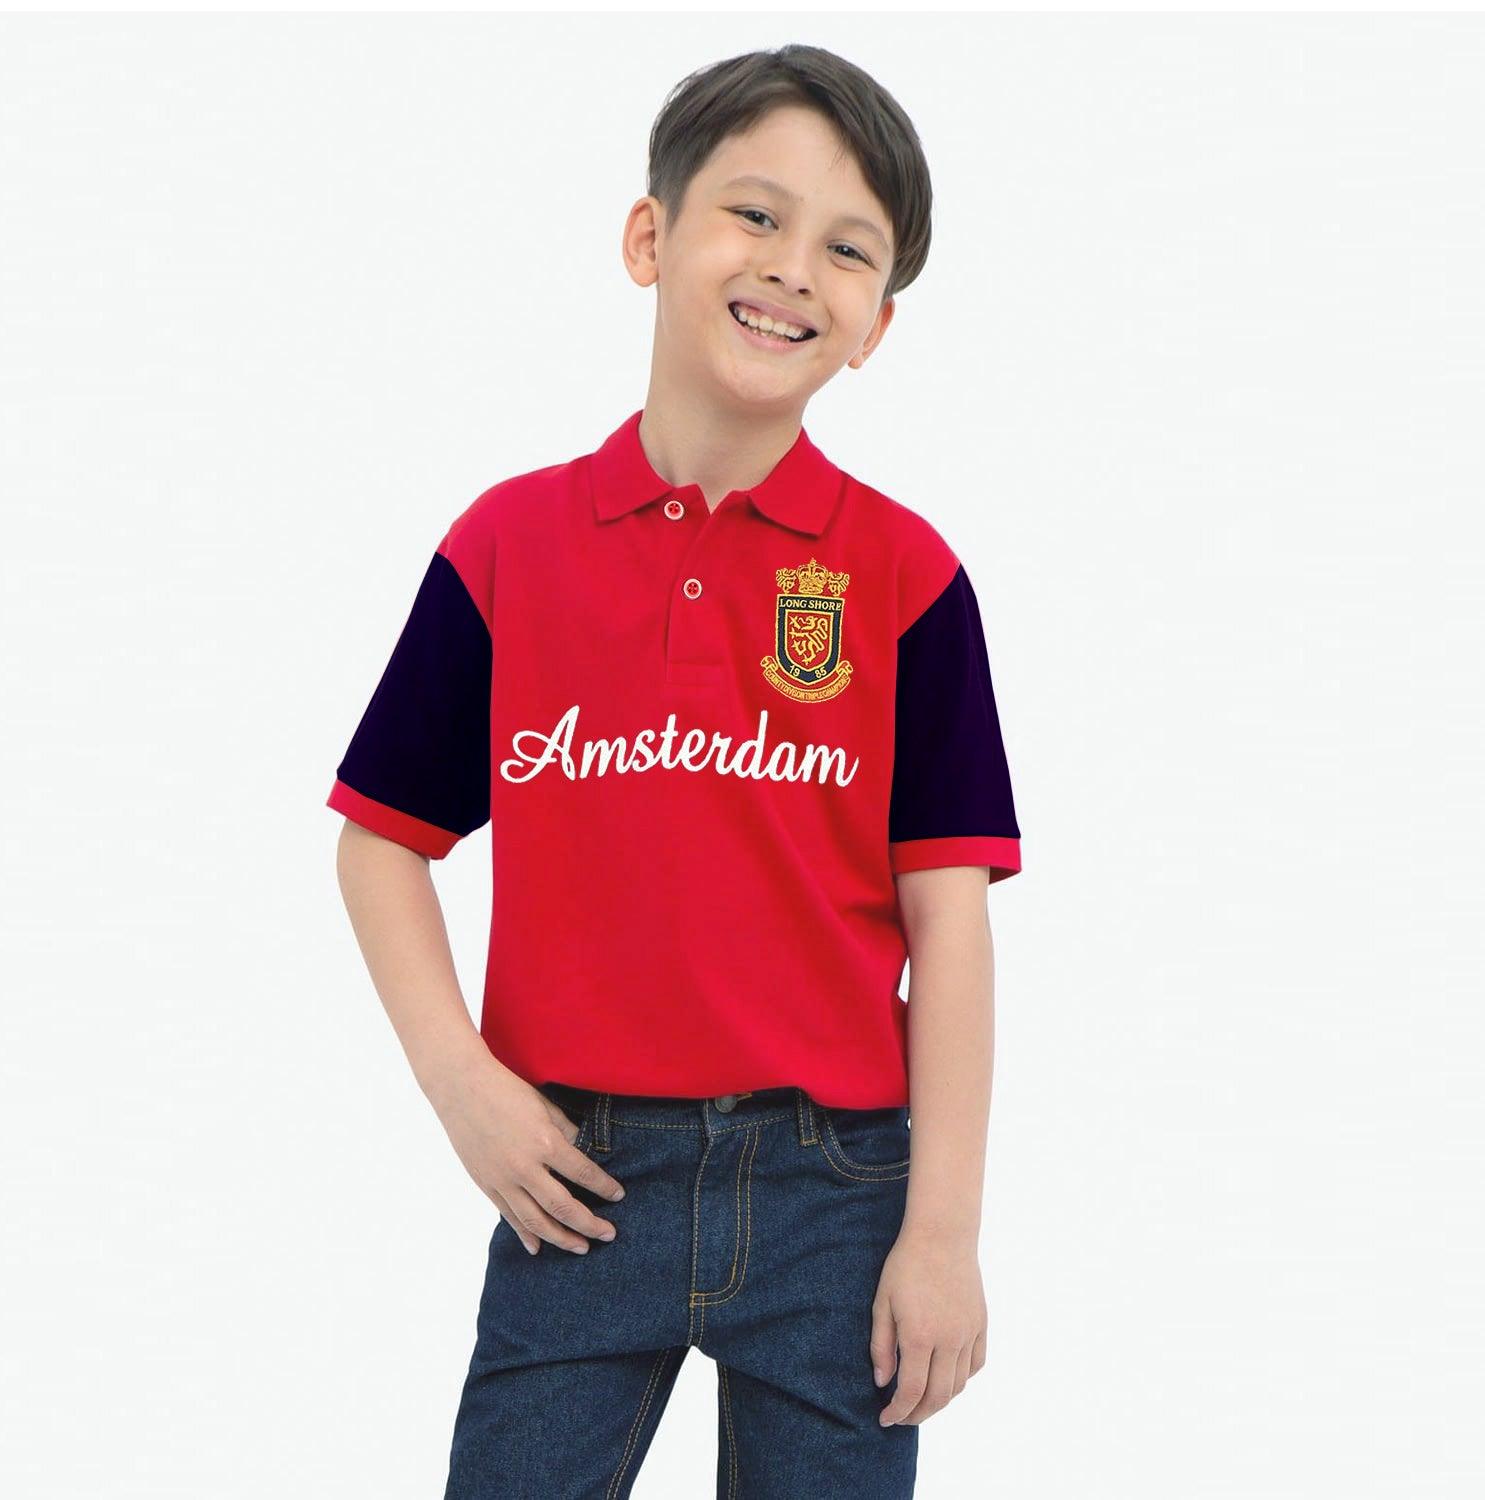 Boy's Fashion Embellished Embroidered Pique Polo Shirt 9-12 MONTH - 10 YRS - Brands River